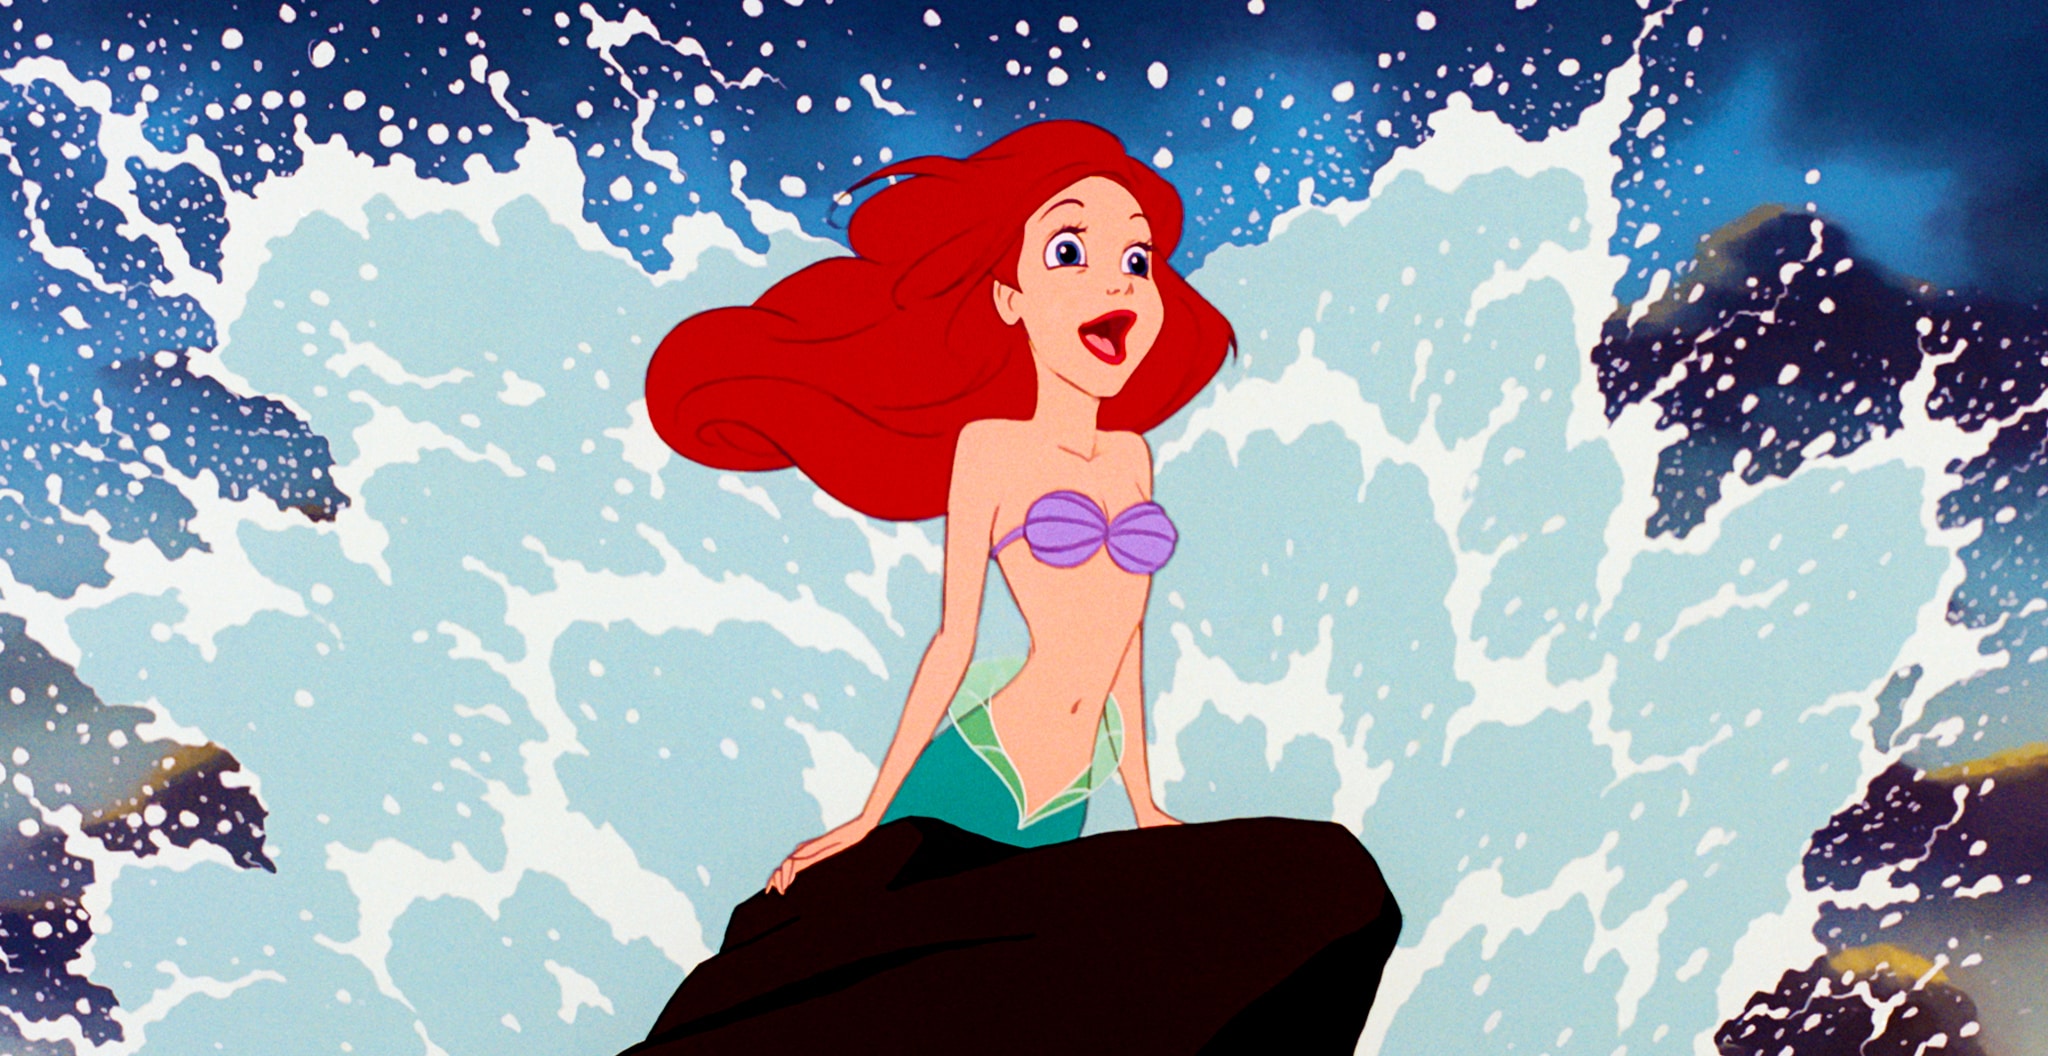 Ariel leans against a rock with a wave splashing behind her.